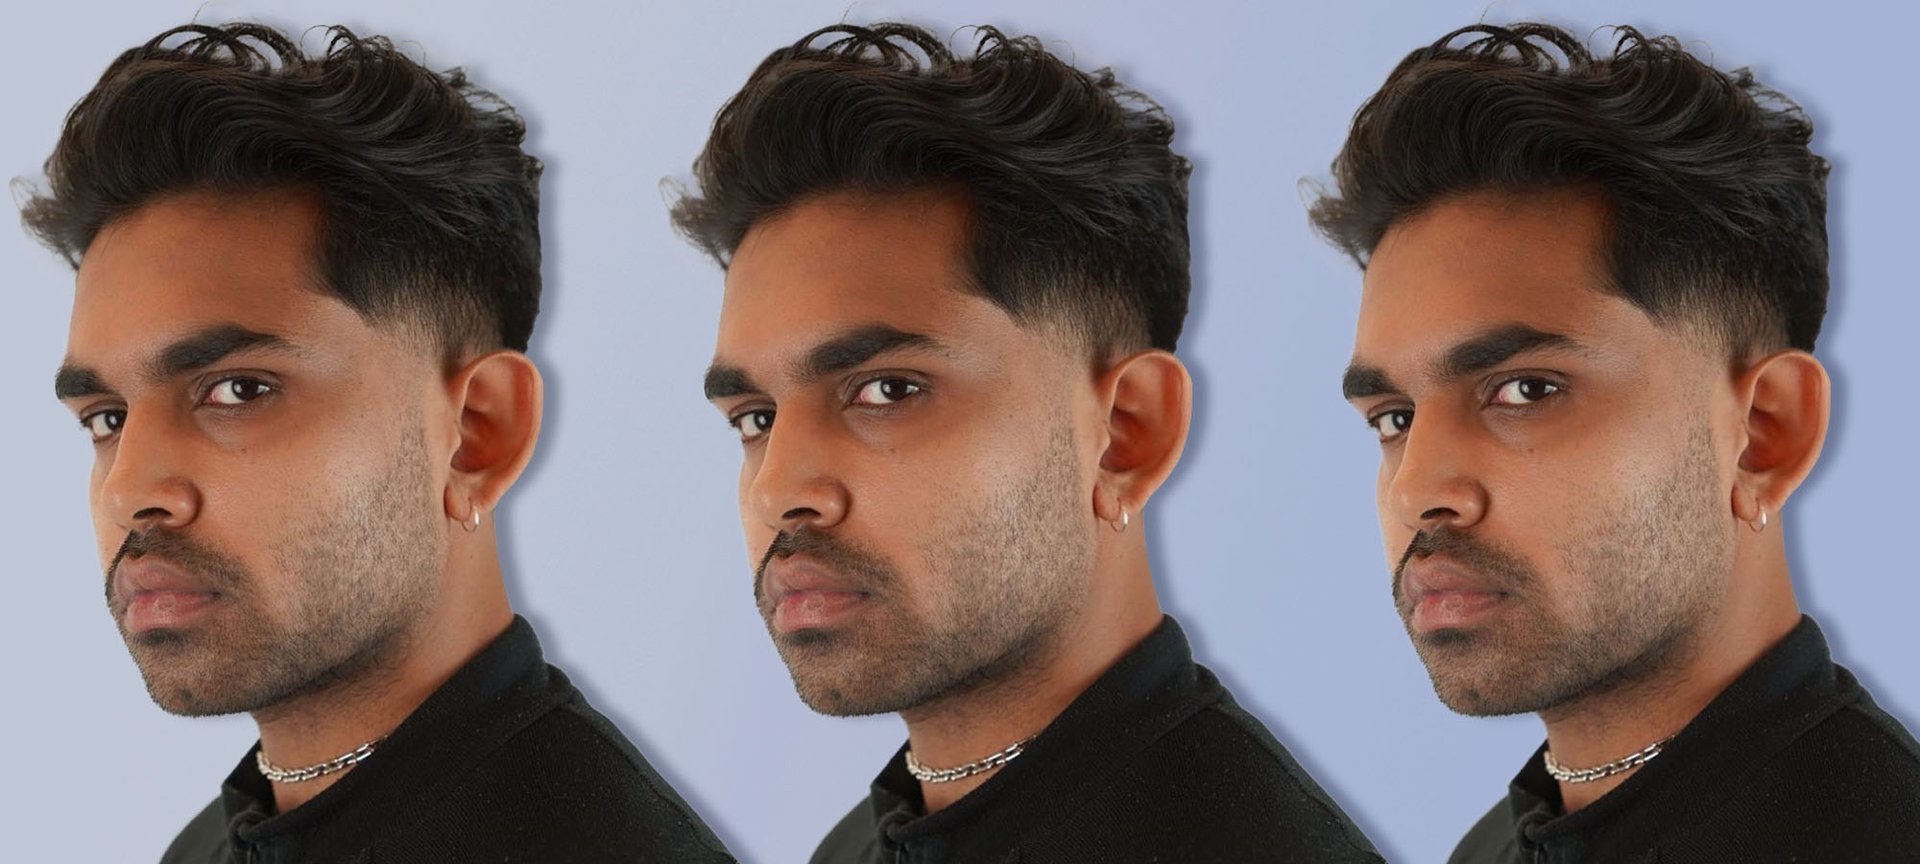 Wavy Quiff for Men How to Style this NonBoring Holiday Hairstyle  All  Things Hair US